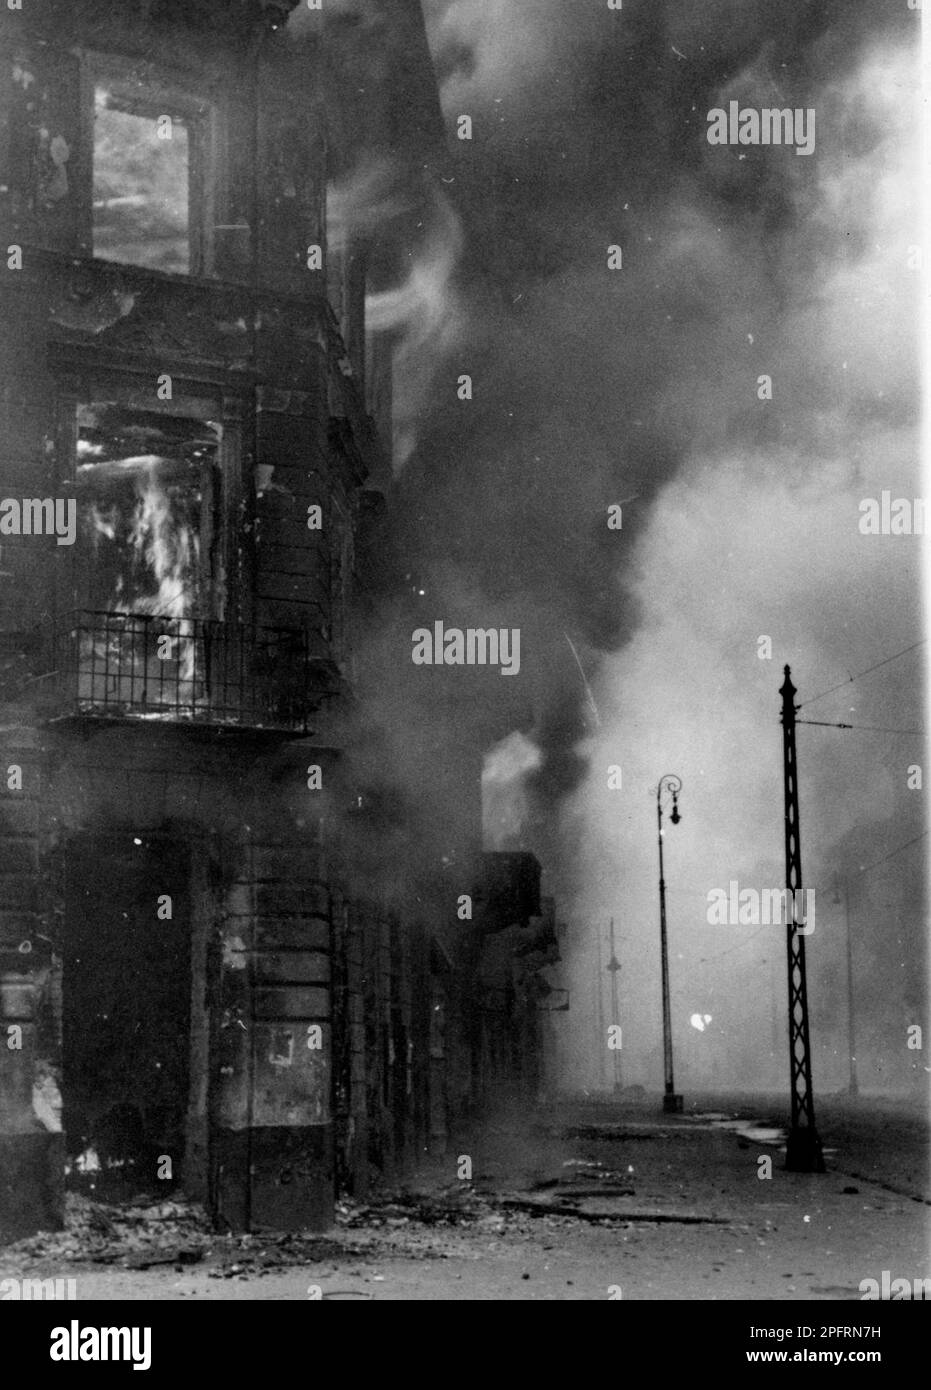 In January 1943 the nazis arrived to round up the Jews of the Warsaw Ghetto  The Jews, resolved to fight it out, took on the SS with homemade and primitive weapons. The defenders were executed or deported and the Ghetto area was systematically demolished. This event is known as The Ghetto Uprising. This image shows Zamenhofa Street in various stages of its destruction. This image is from the German photographic record of the event, known as the Stroop report. Stock Photo